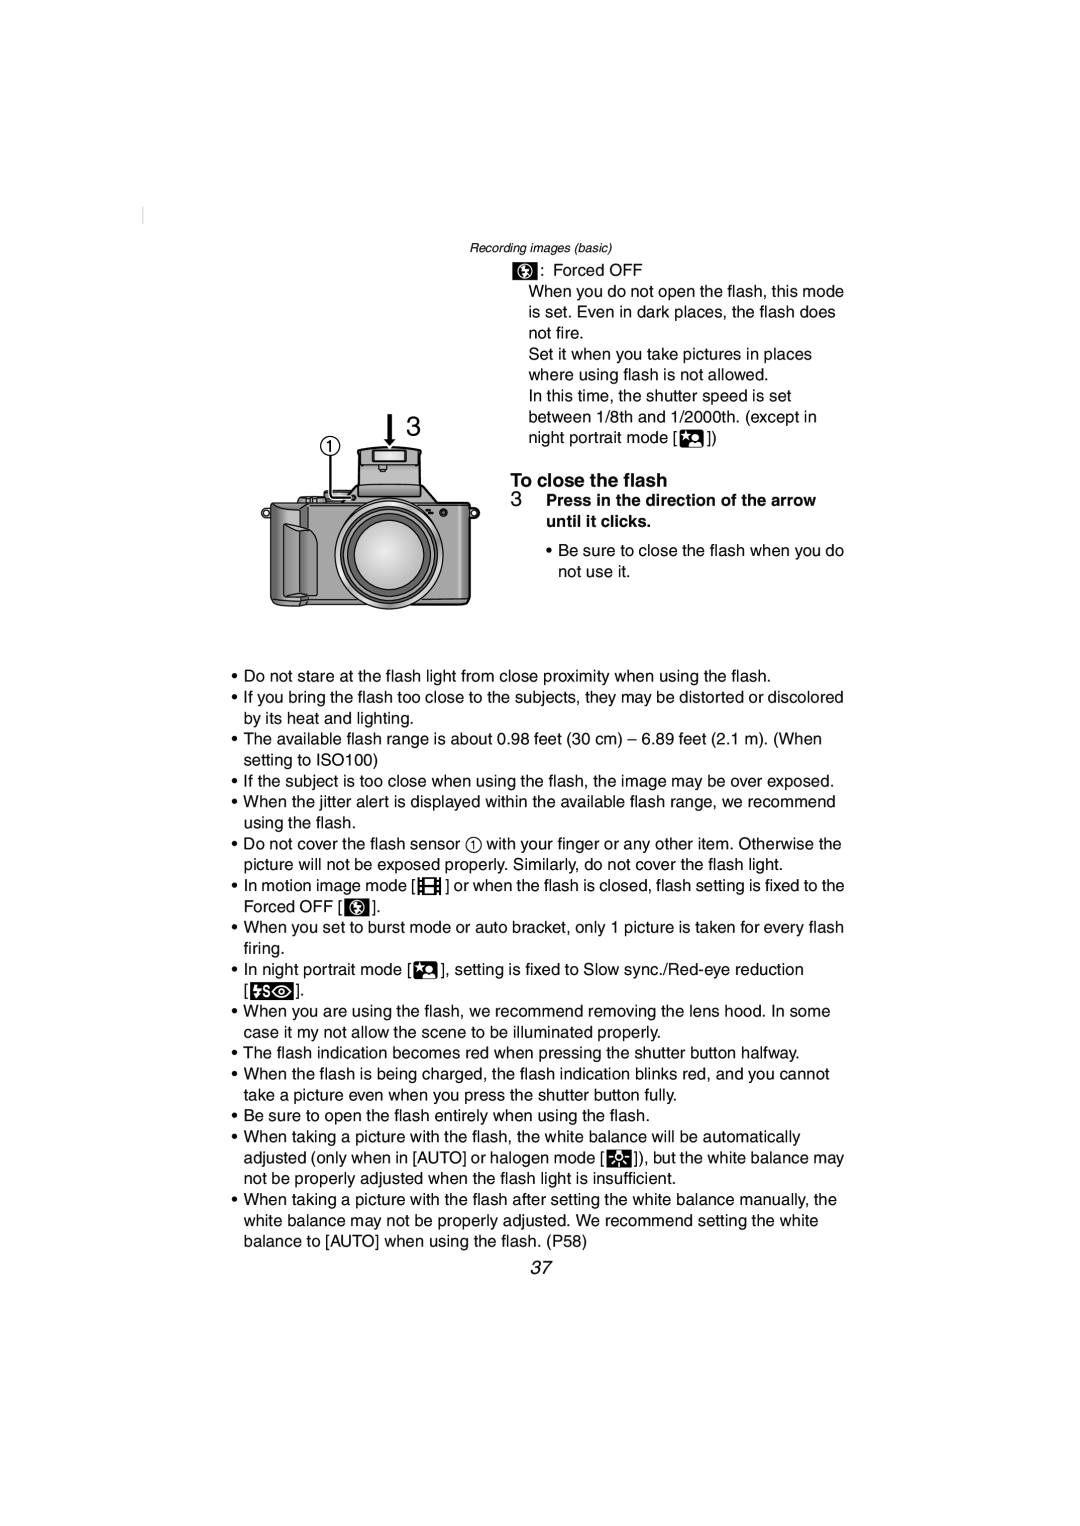 Panasonic DMC-FZ2PP operating instructions To close the flash, Press in the direction of the arrow until it clicks 